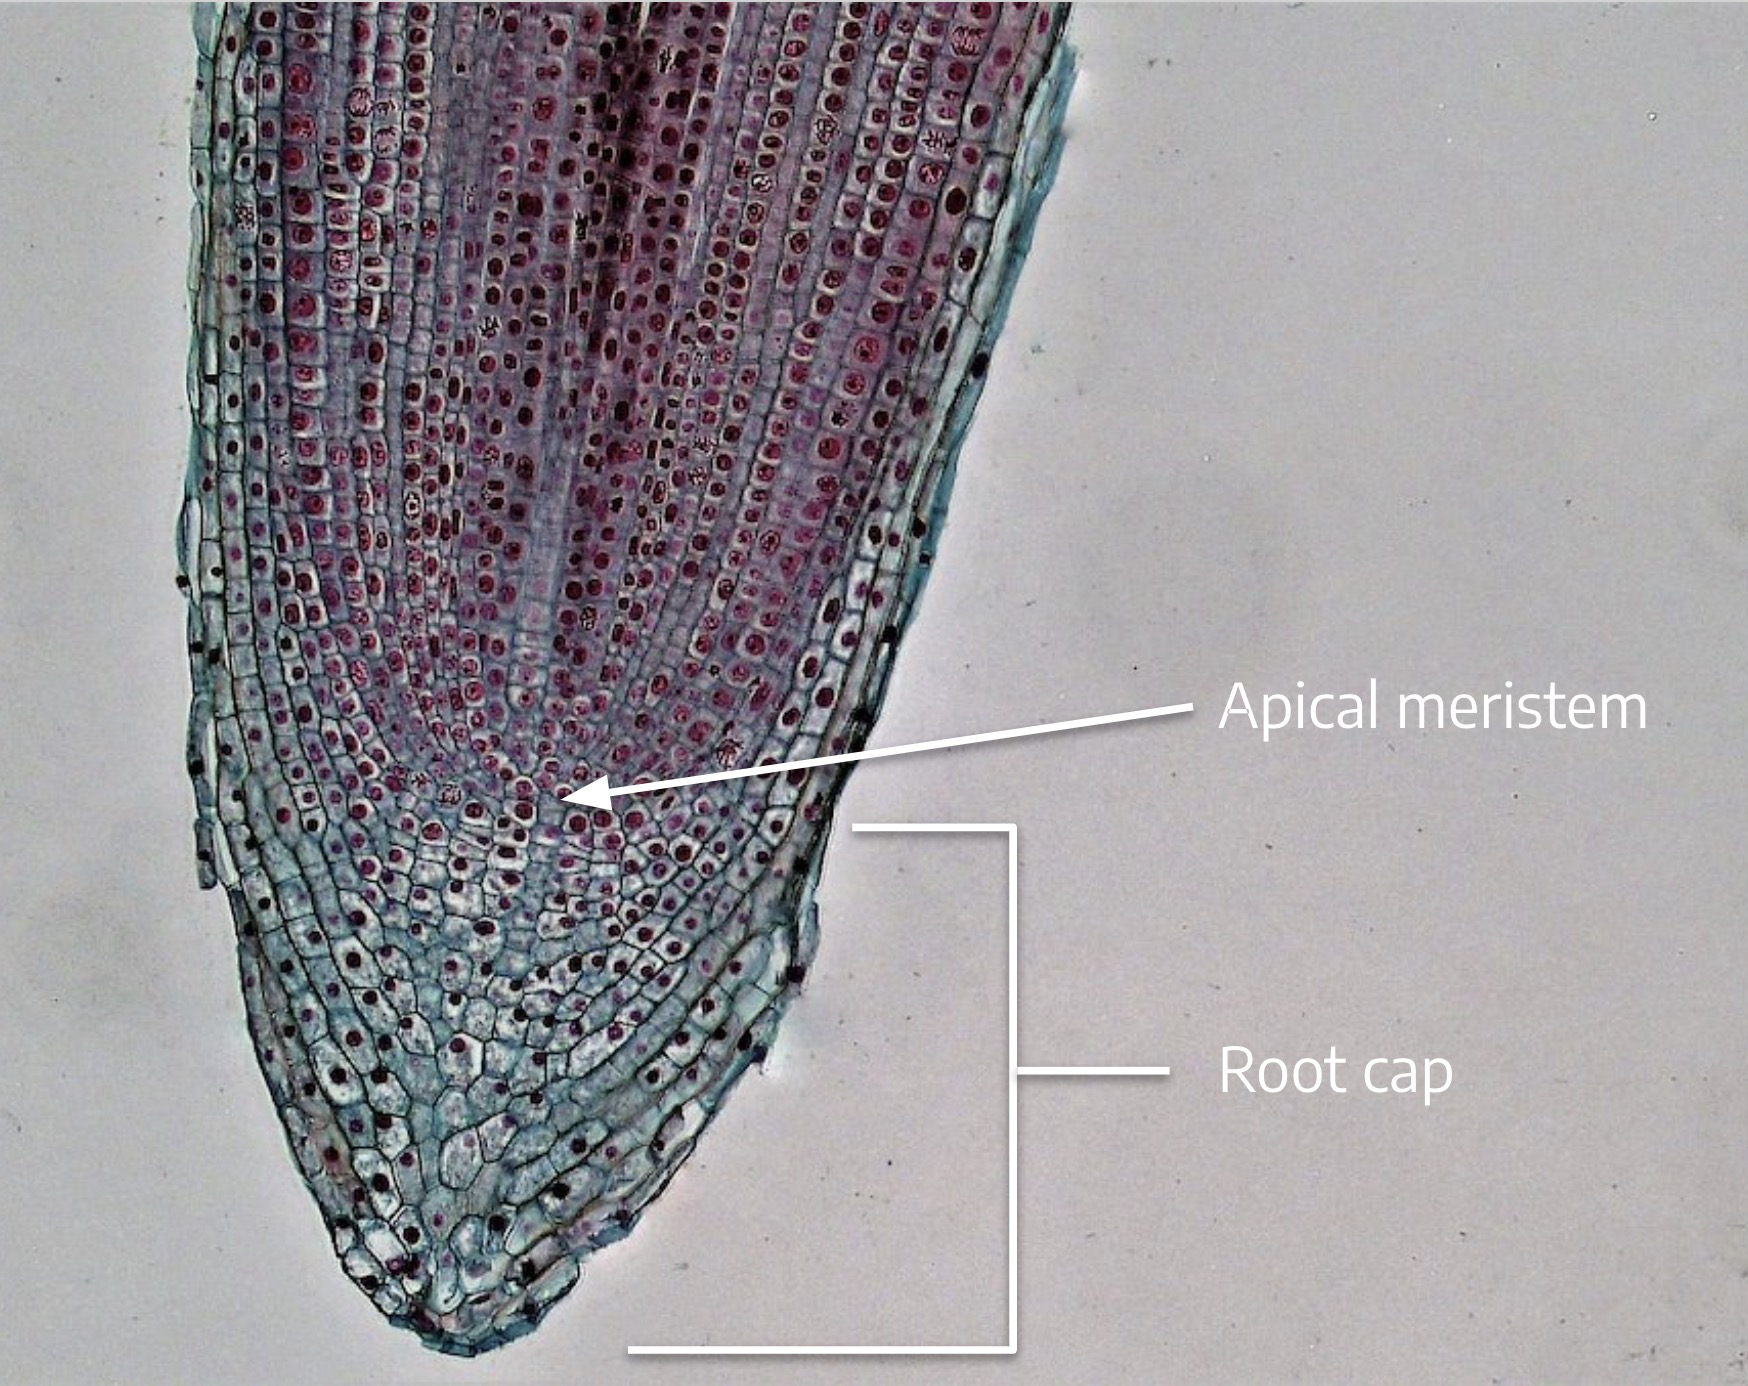 Microscope view - root tip with labels